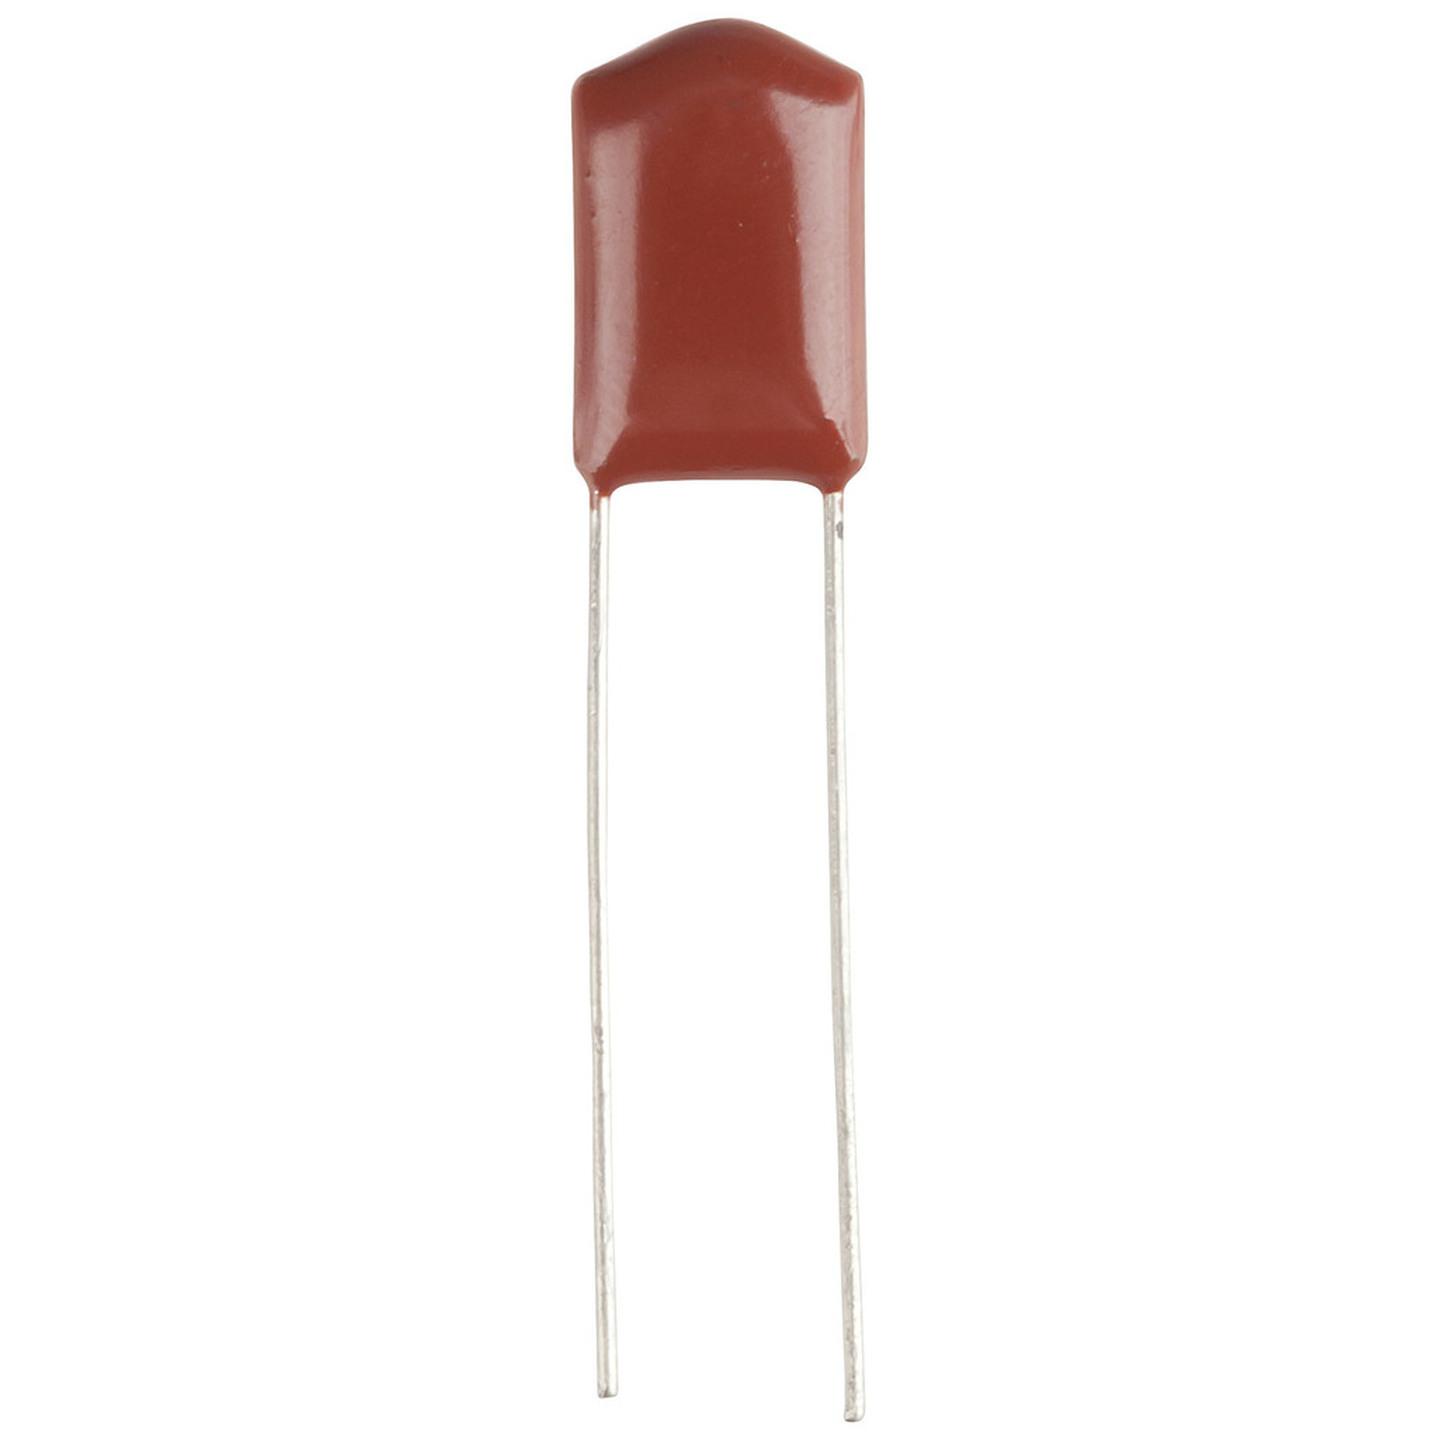 39nF 100VDC Polyester Capacitor